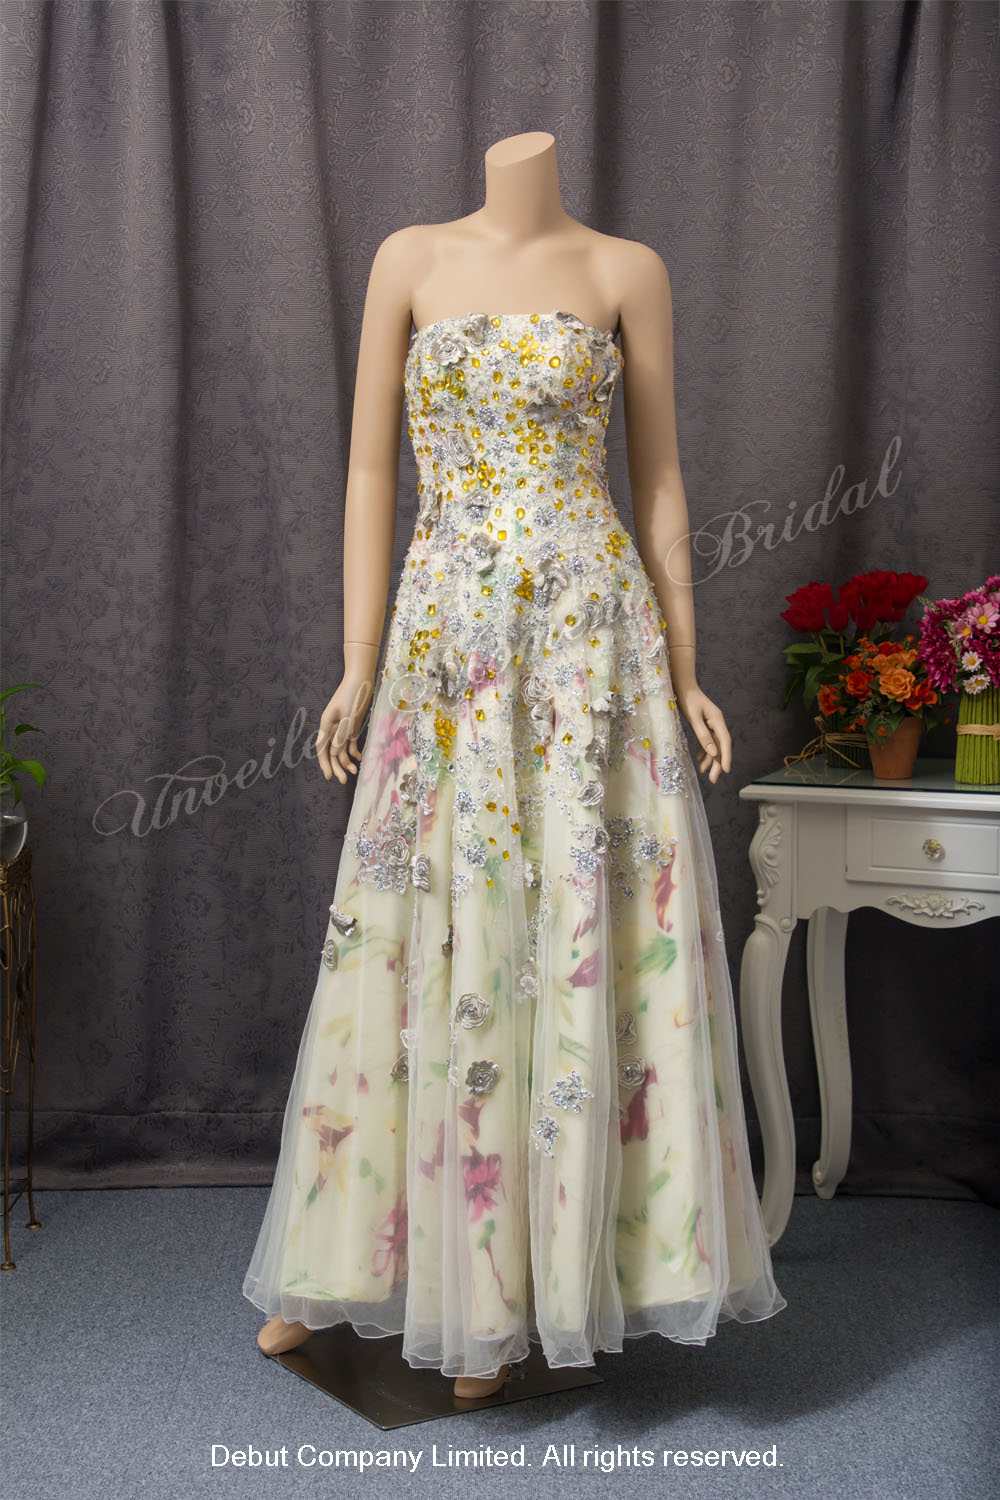 Bride in strapless, floor-length, A-line floral print evening dress with lace embellishments, beadings and 3-dimensional flowers 無肩帶, 立體花飾, 水晶釘珠, 閃銀腰帶, 彩繪花布晚裝裙